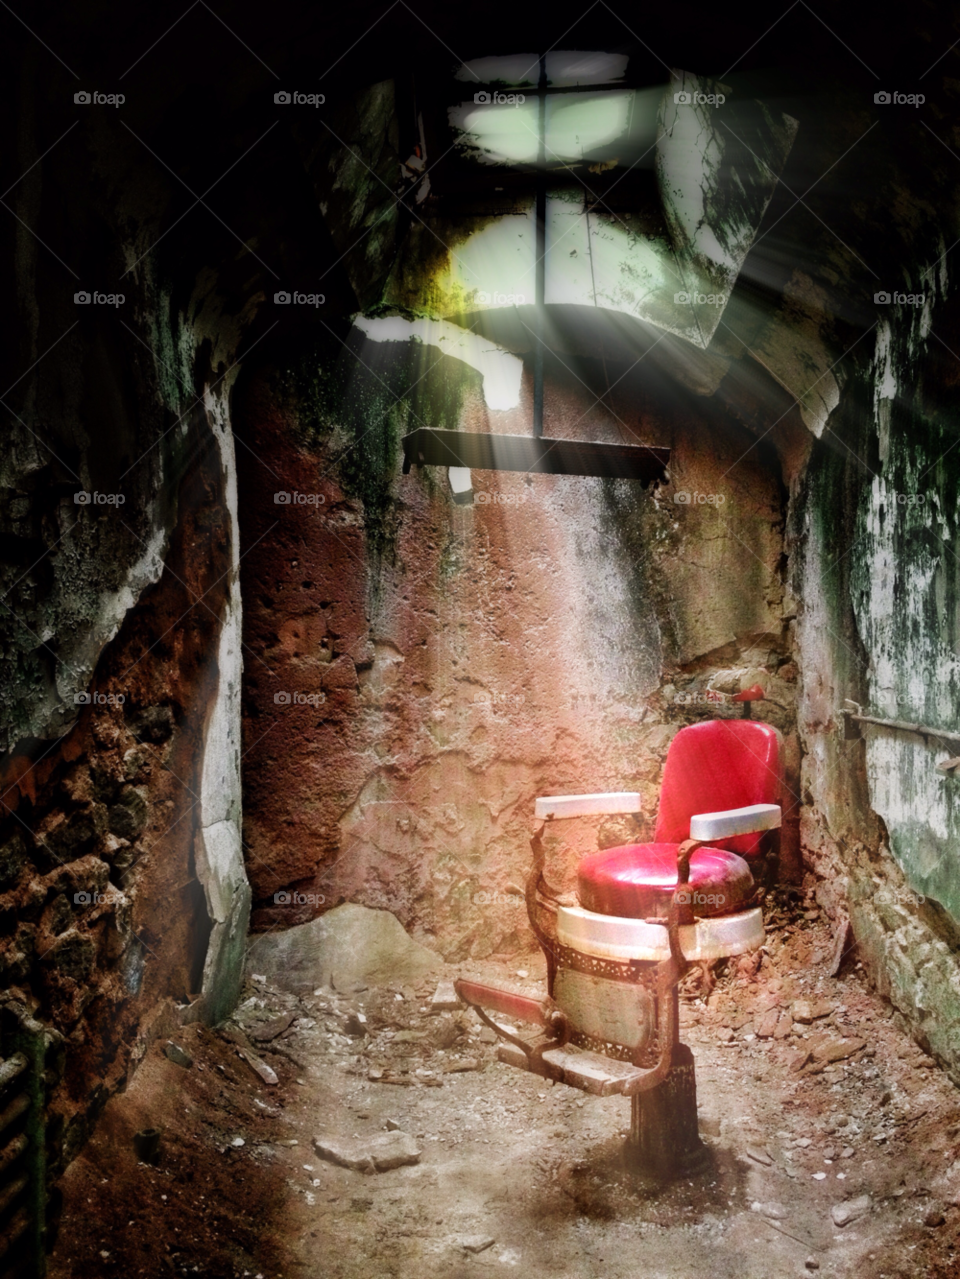 chair prison cell chair red rays prison barber dark ethereal cell block penitentiary by middlingsort